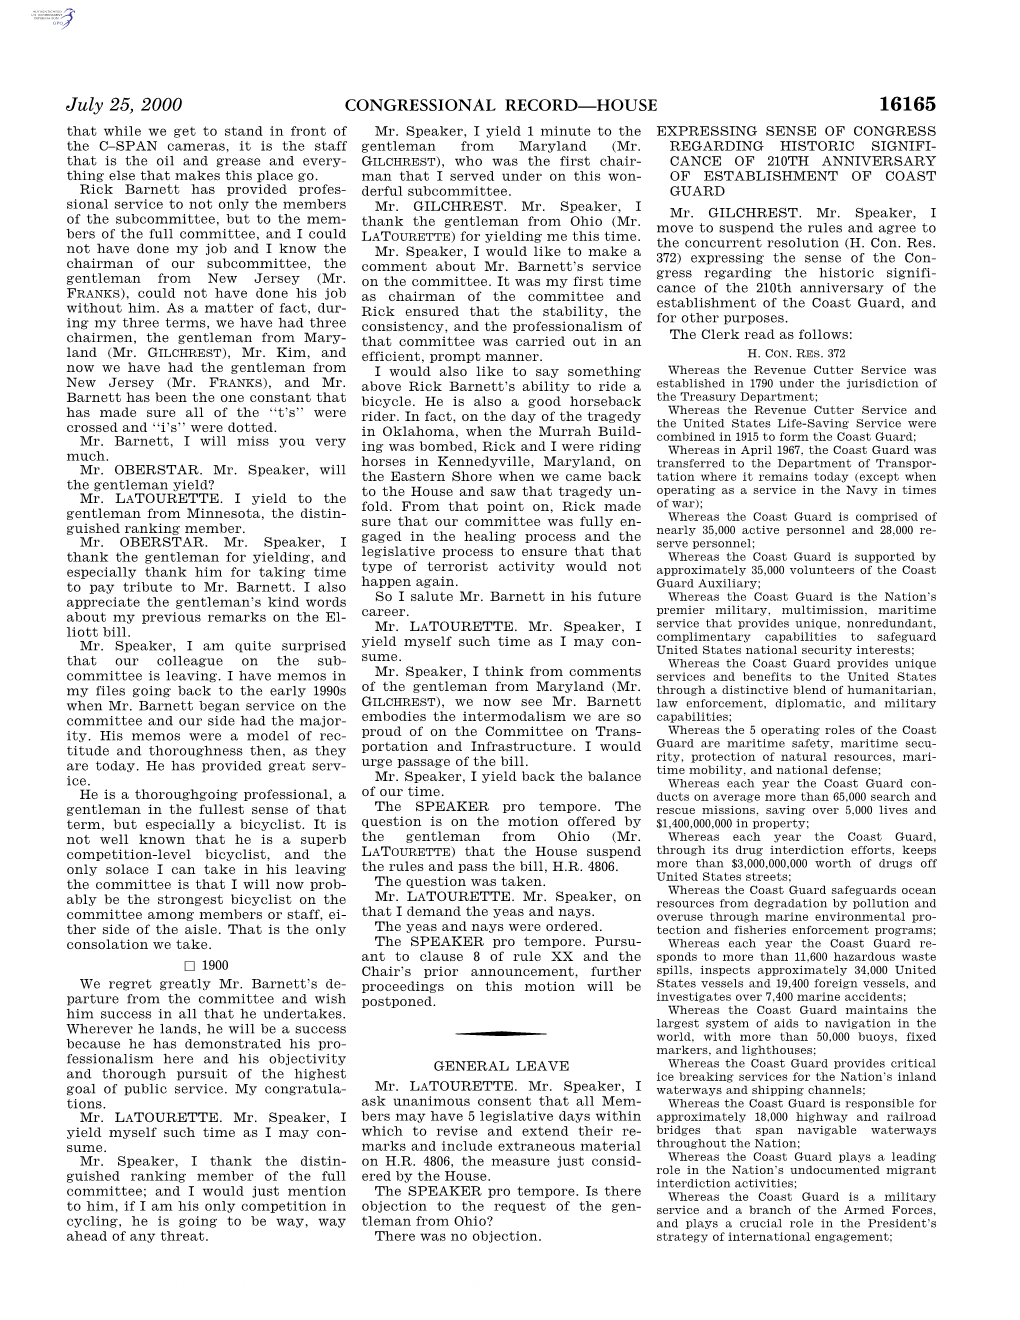 CONGRESSIONAL RECORD—HOUSE July 25, 2000